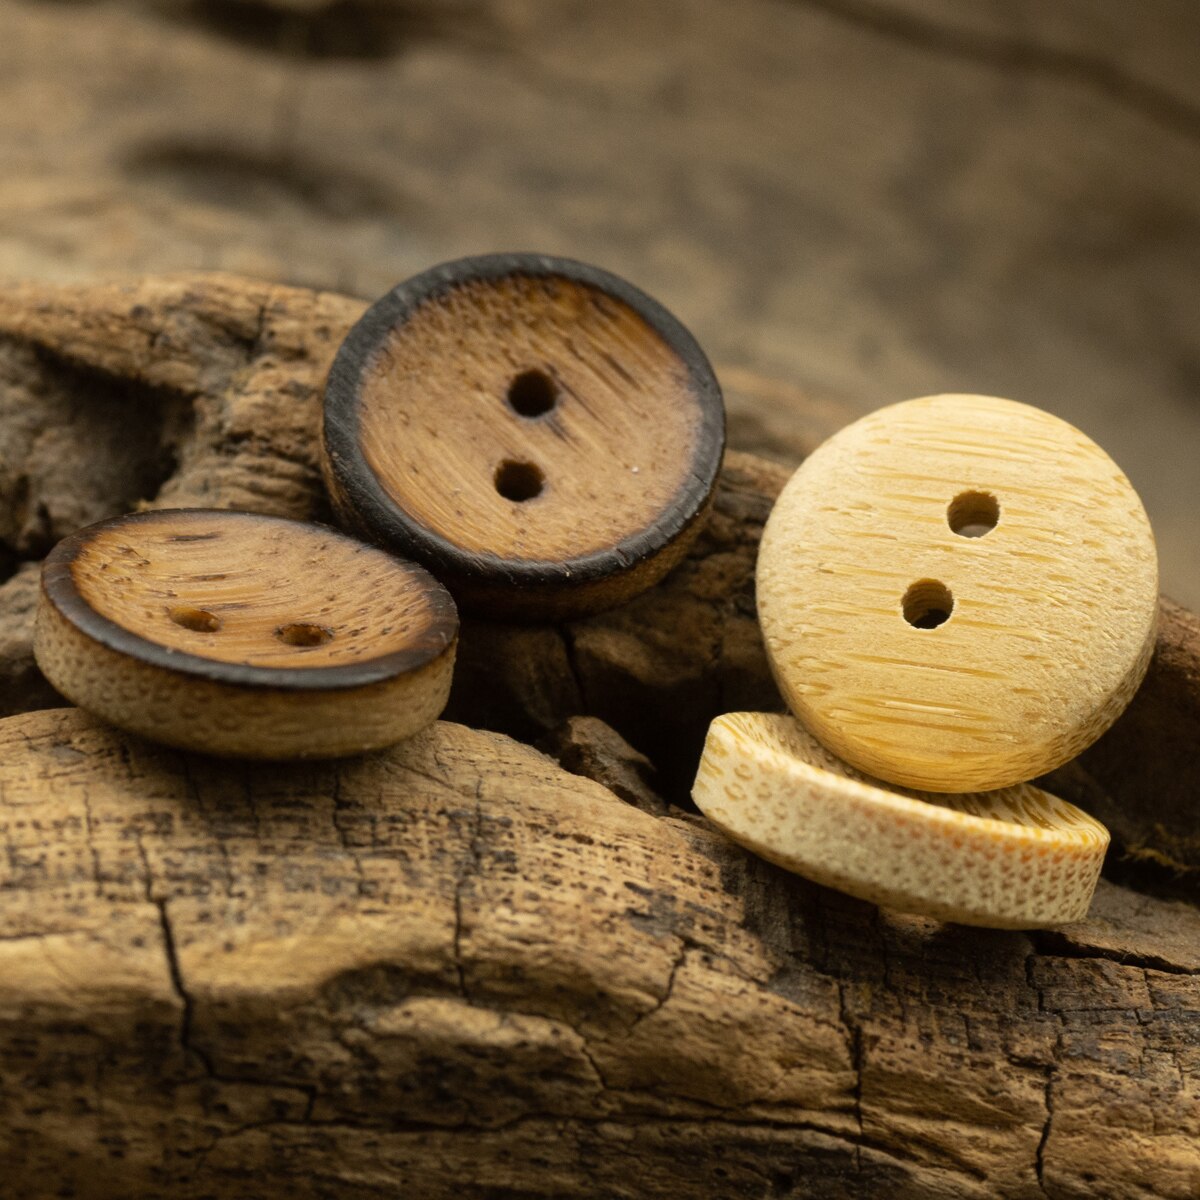 12pcs Bamboo Button Wood Bowl Shape 2 Hole Scorched Natural Original Sewing Accessories